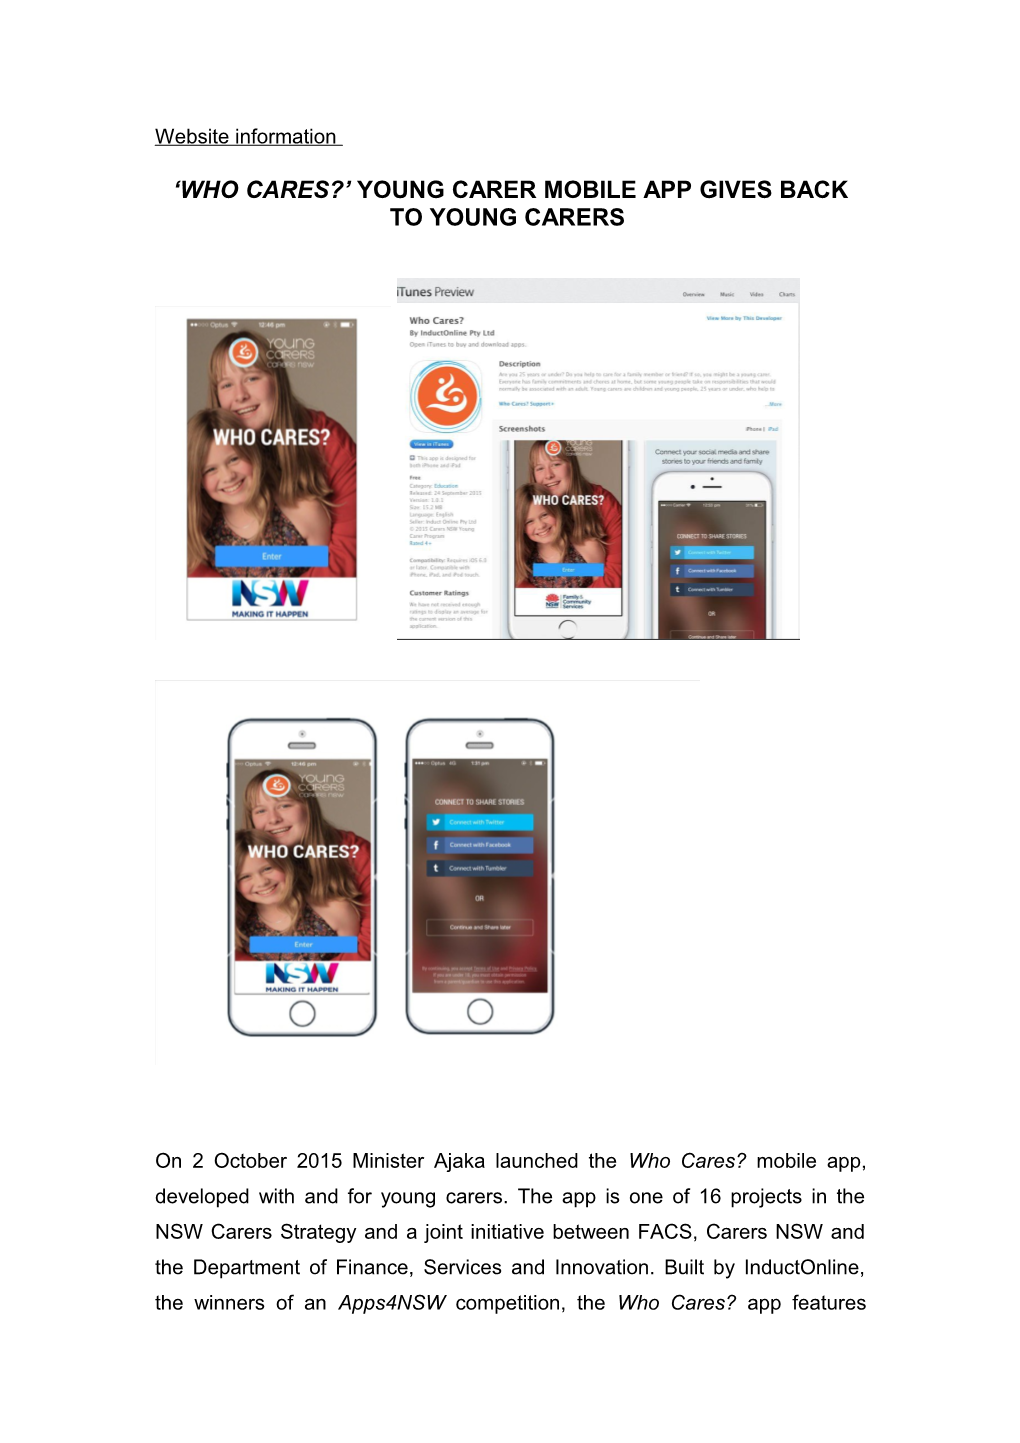 Who Cares? Young Carer Mobile App Gives Back to Young Carers